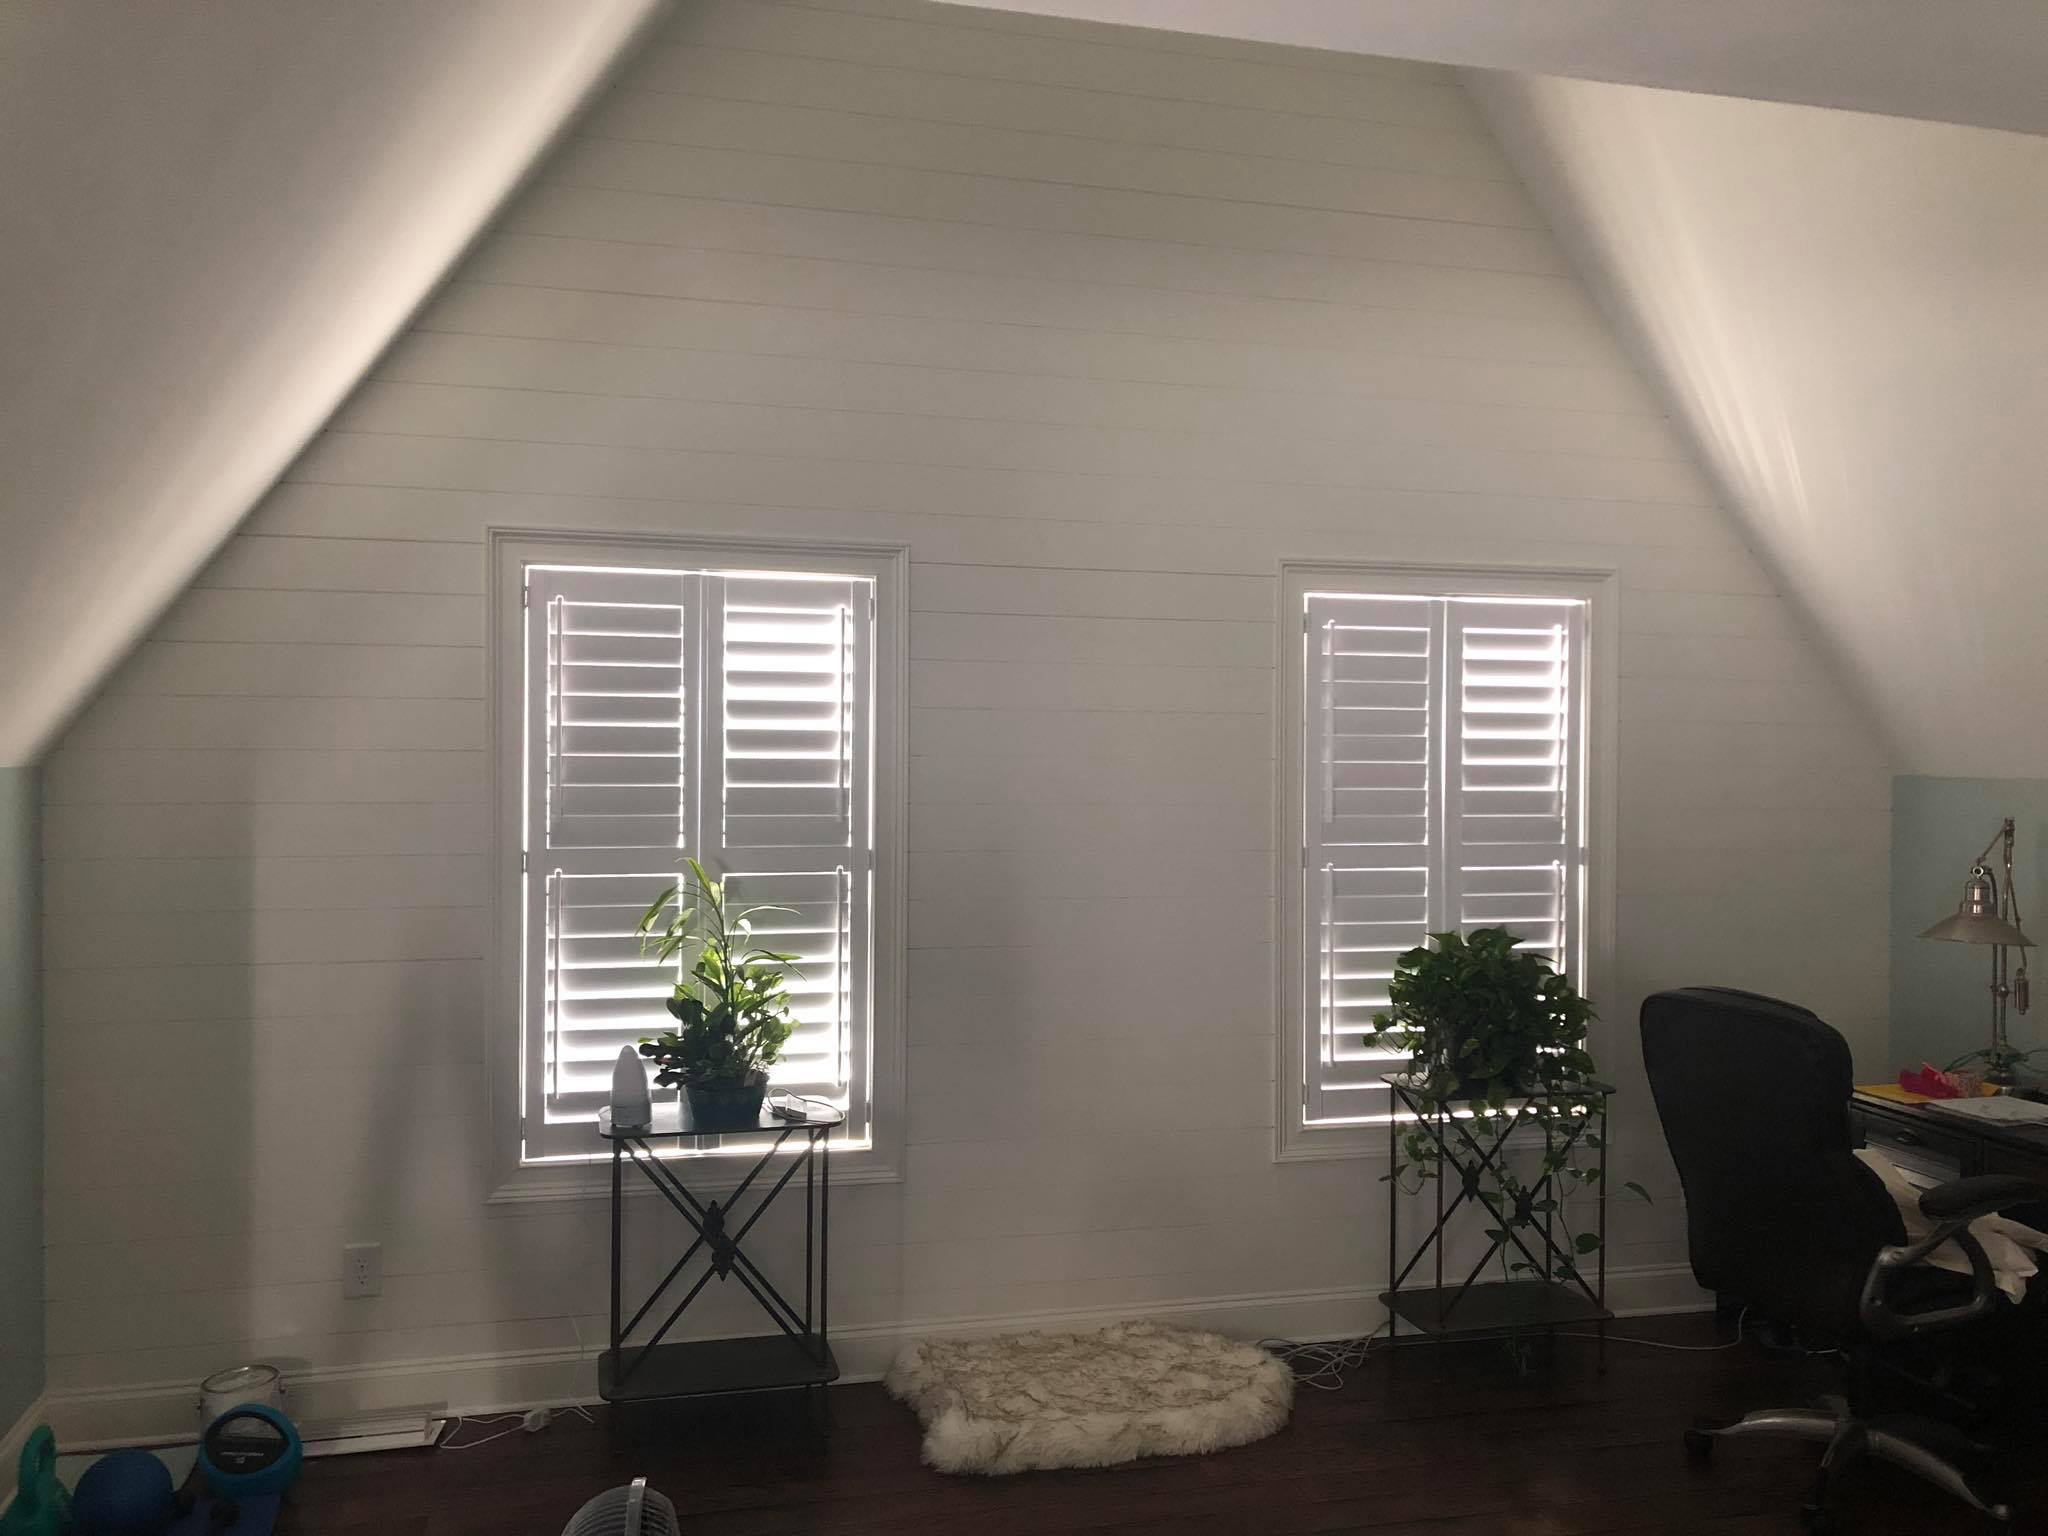 Shiplap On Walls Painted White with Hardwood Floor Installed 6